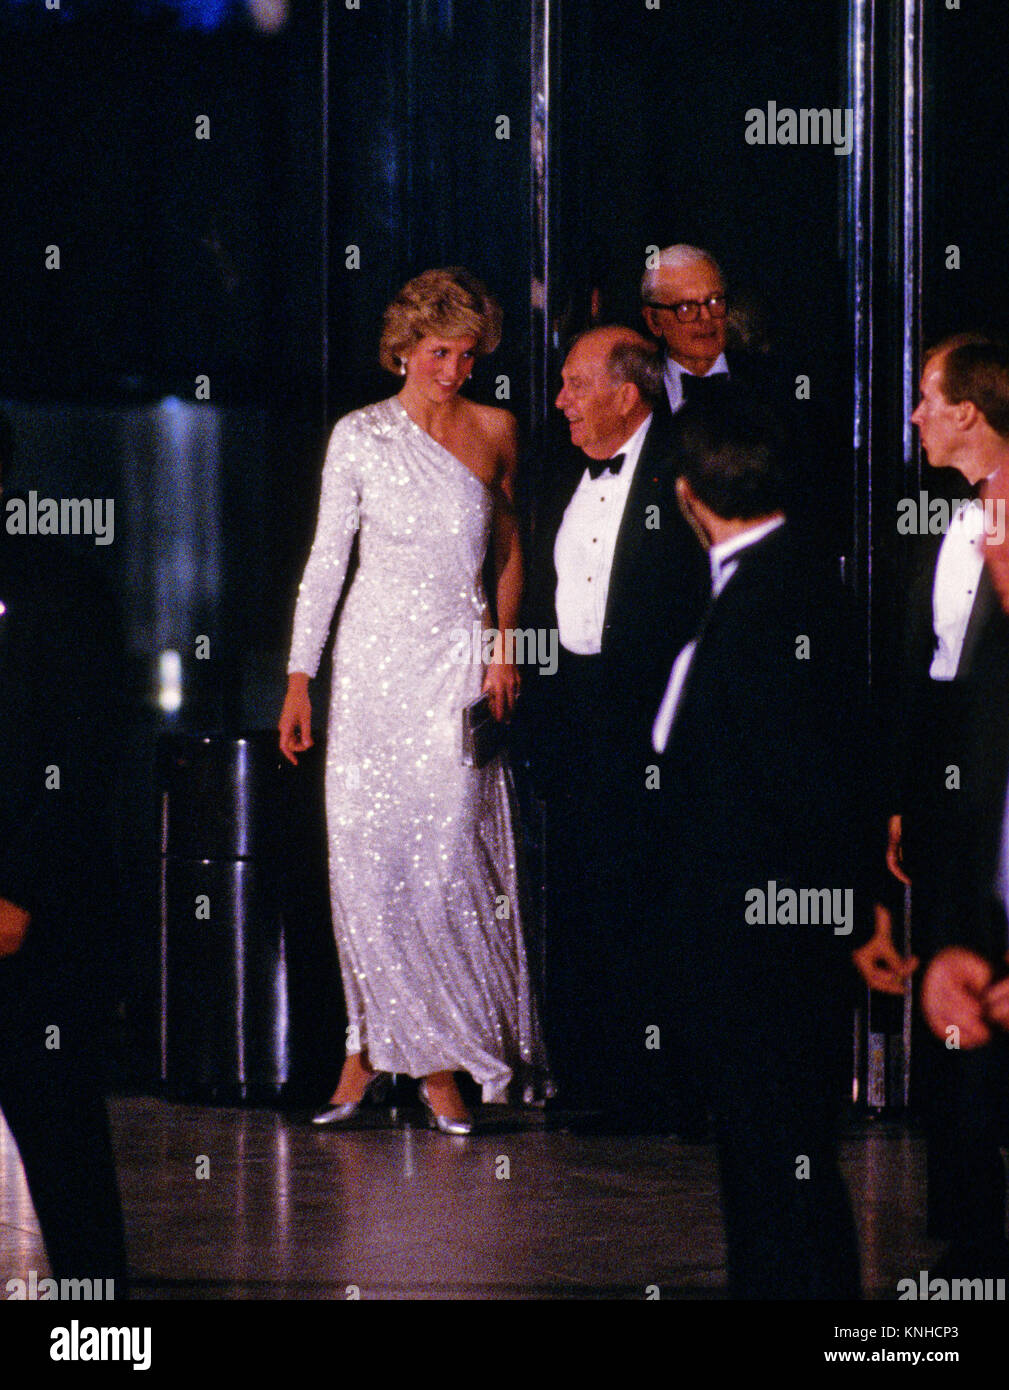 Princess Diana departs the National Gallery of Art in Washington, DC following an evening dinner and reception accompanied by Dr. Franklin Murphy, Board Chairman of the National Gallery of Art, and John Stevenson, President of the National Gallery of Art, in Washington, DC on November 11, 1985. Credit: Howard L. Sachs / CNP/MediaPunch/MediaPunch Stock Photo